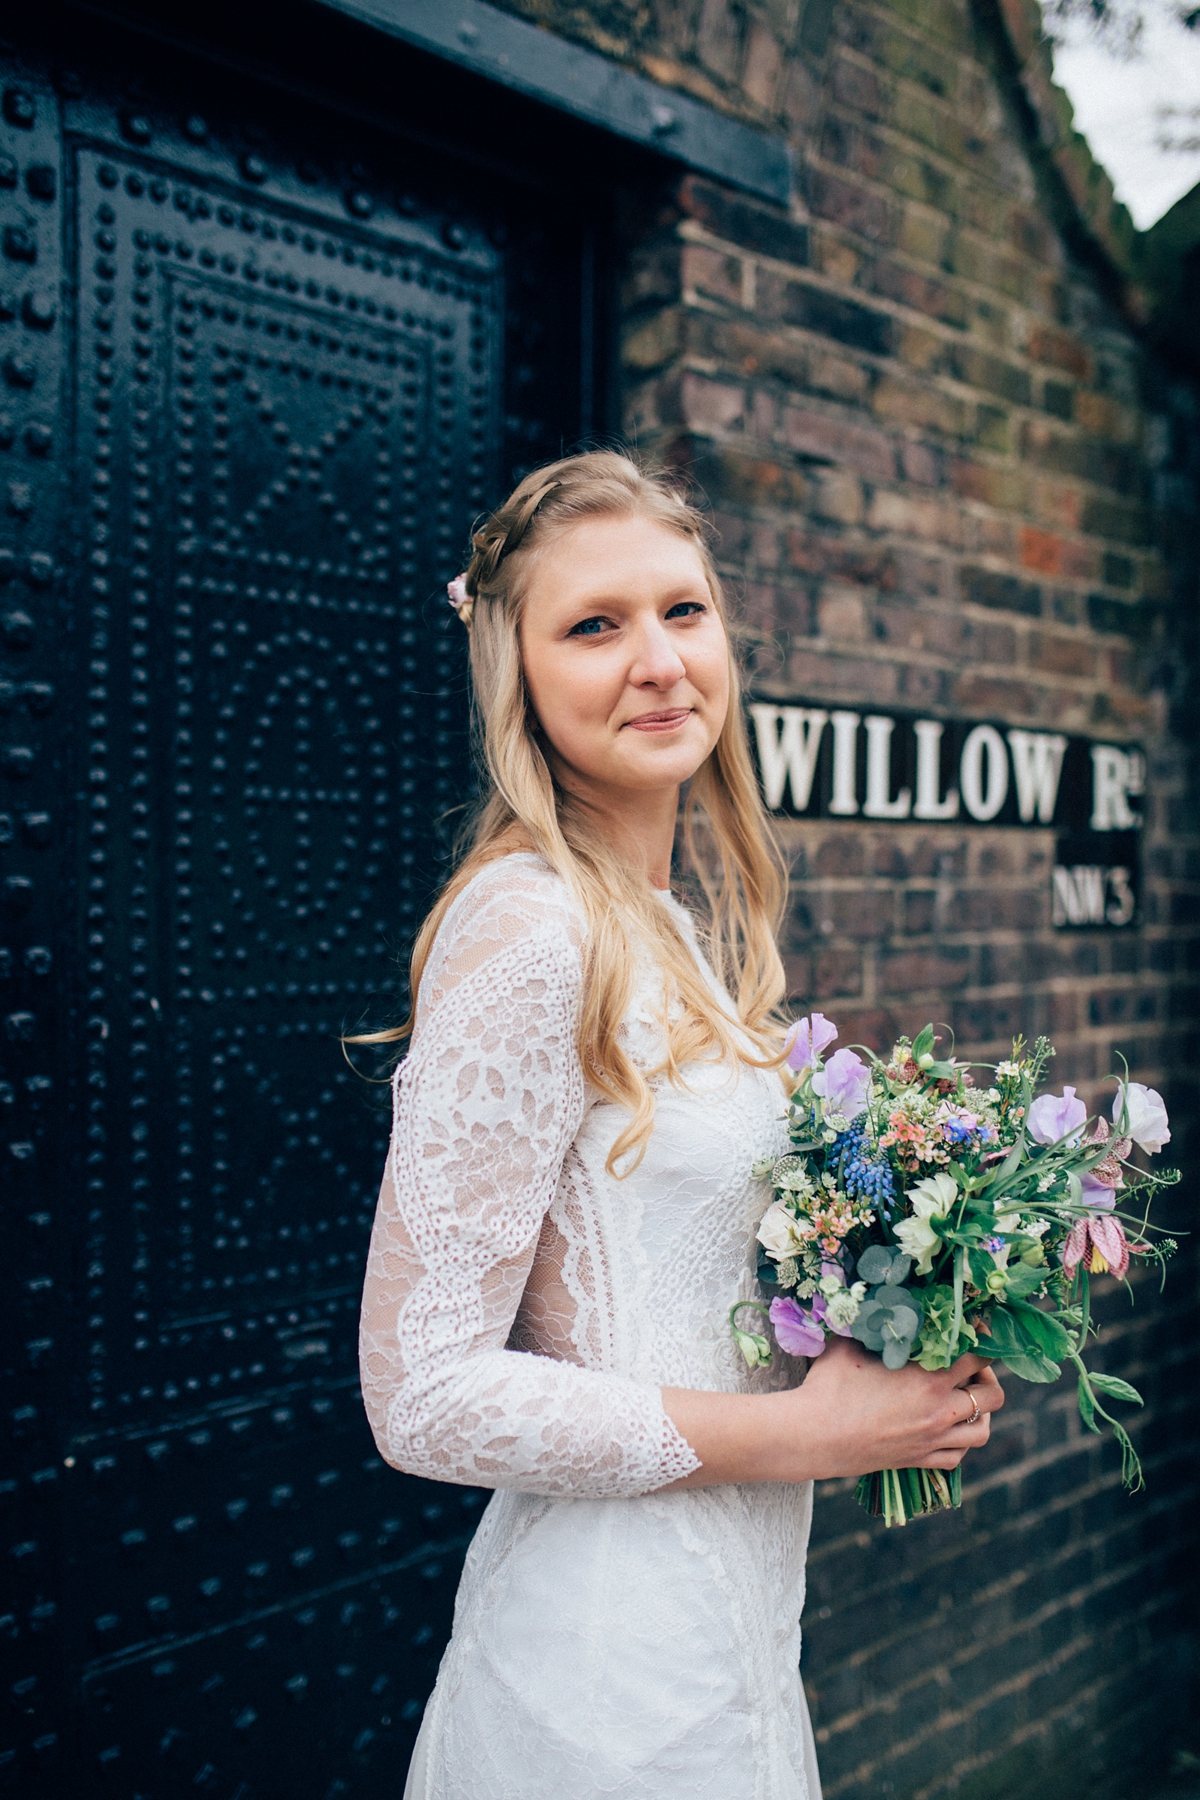 40 A Grace Loves Lace gown for a woodland inspired London pub wedding. Images by Nikki van der Molen